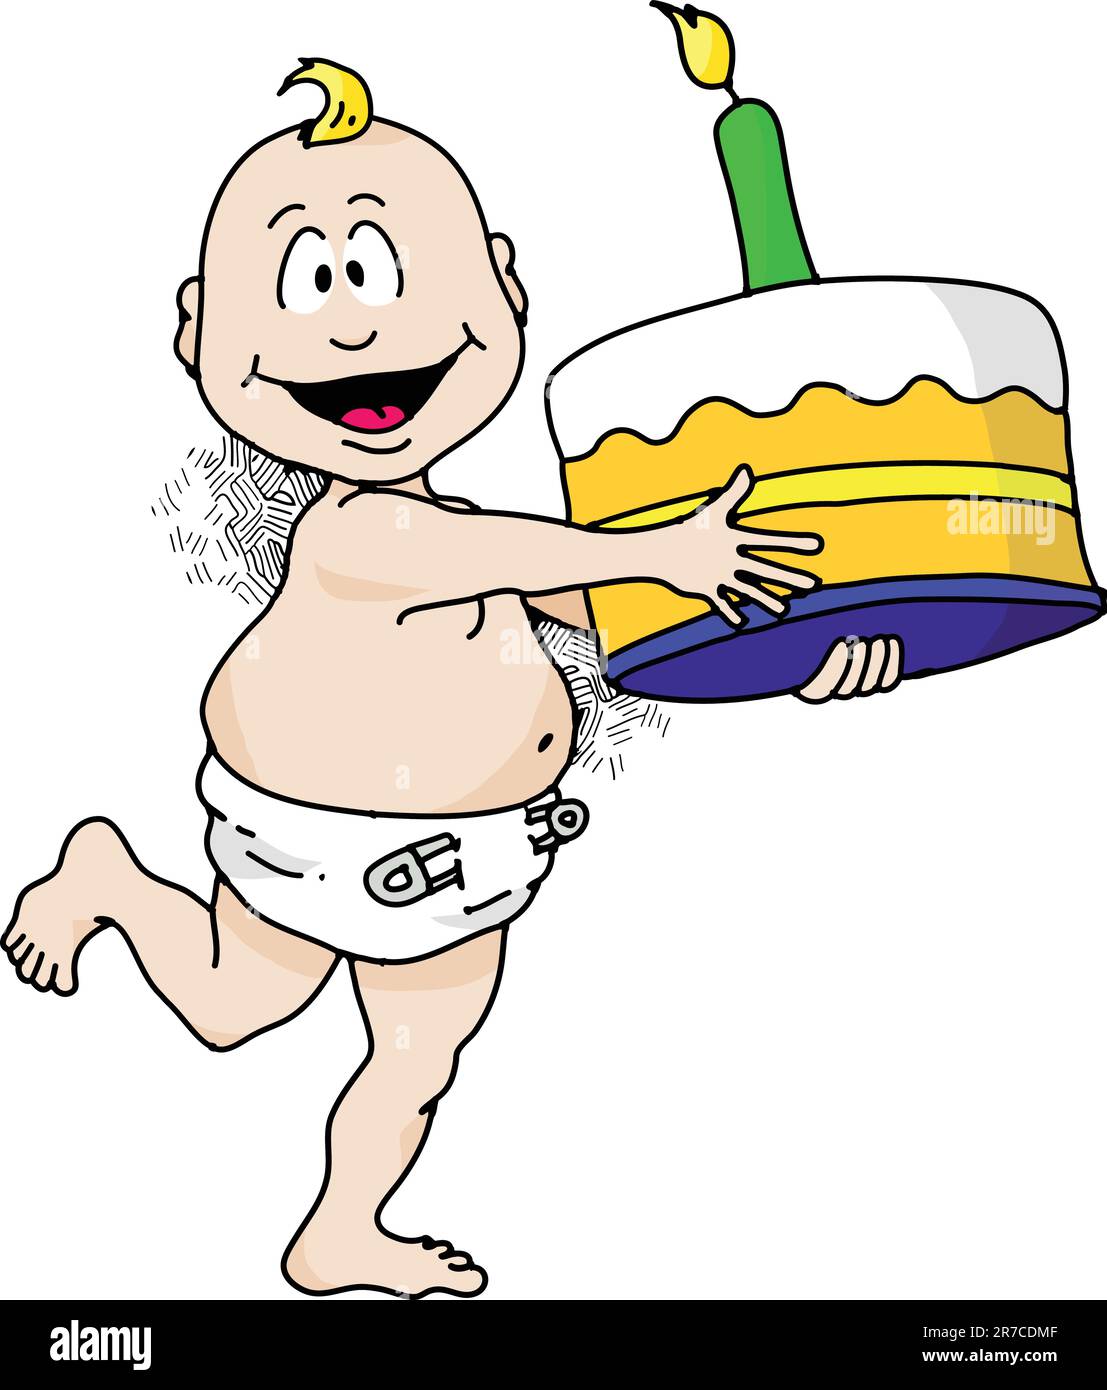 Cartoon image of a baby running with a birthday cake. Stock Vector